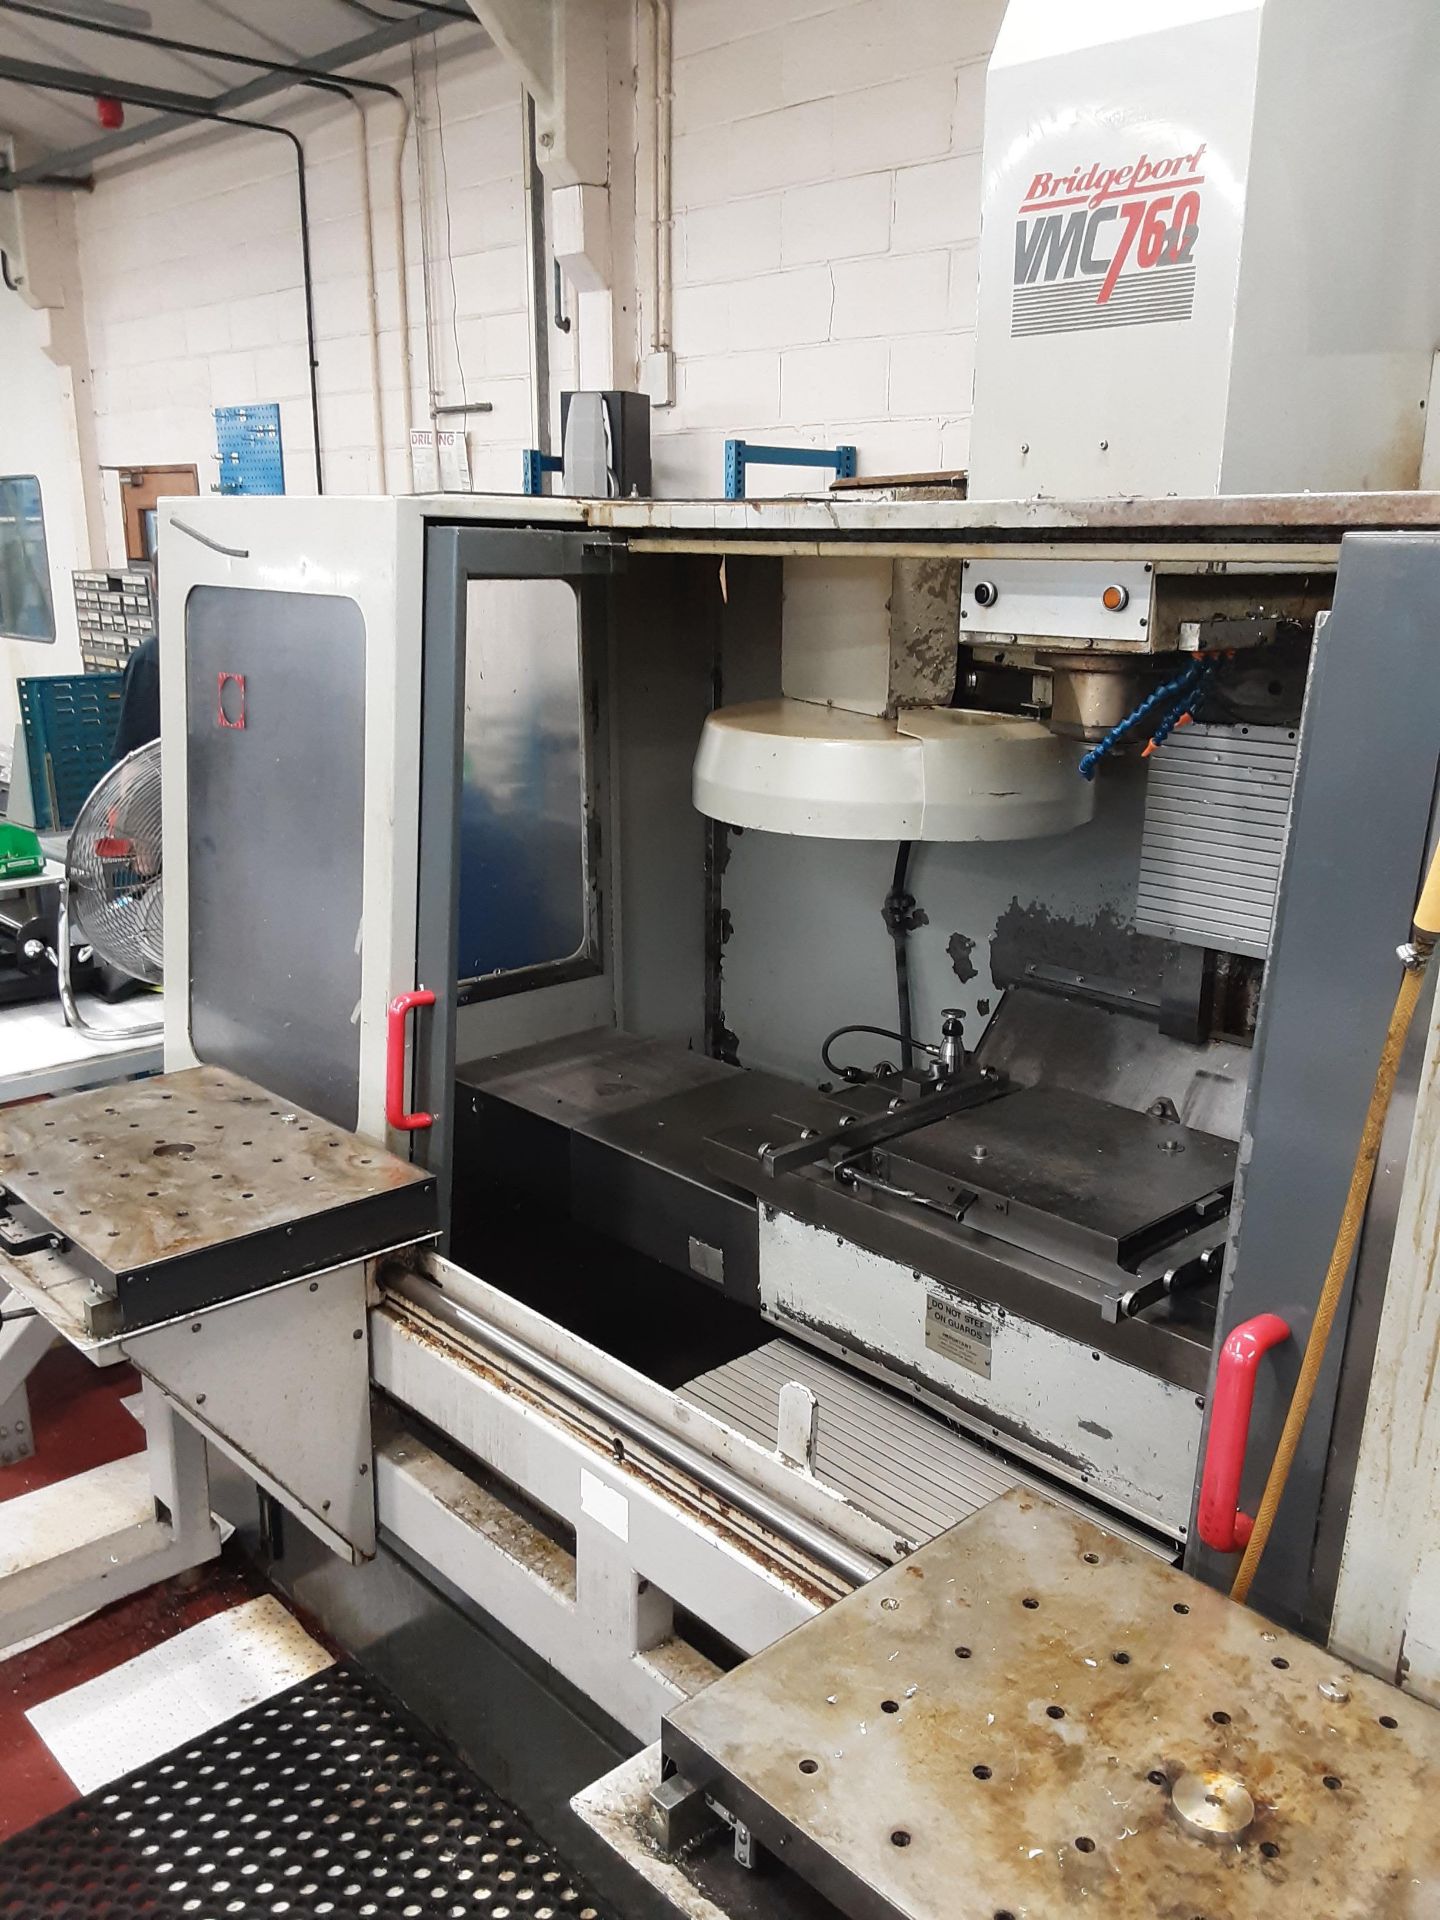 Bridgeport VMC 760 CNC vertical machining centre with work bench and swarf skip - Serial No: 20363 - Image 5 of 27